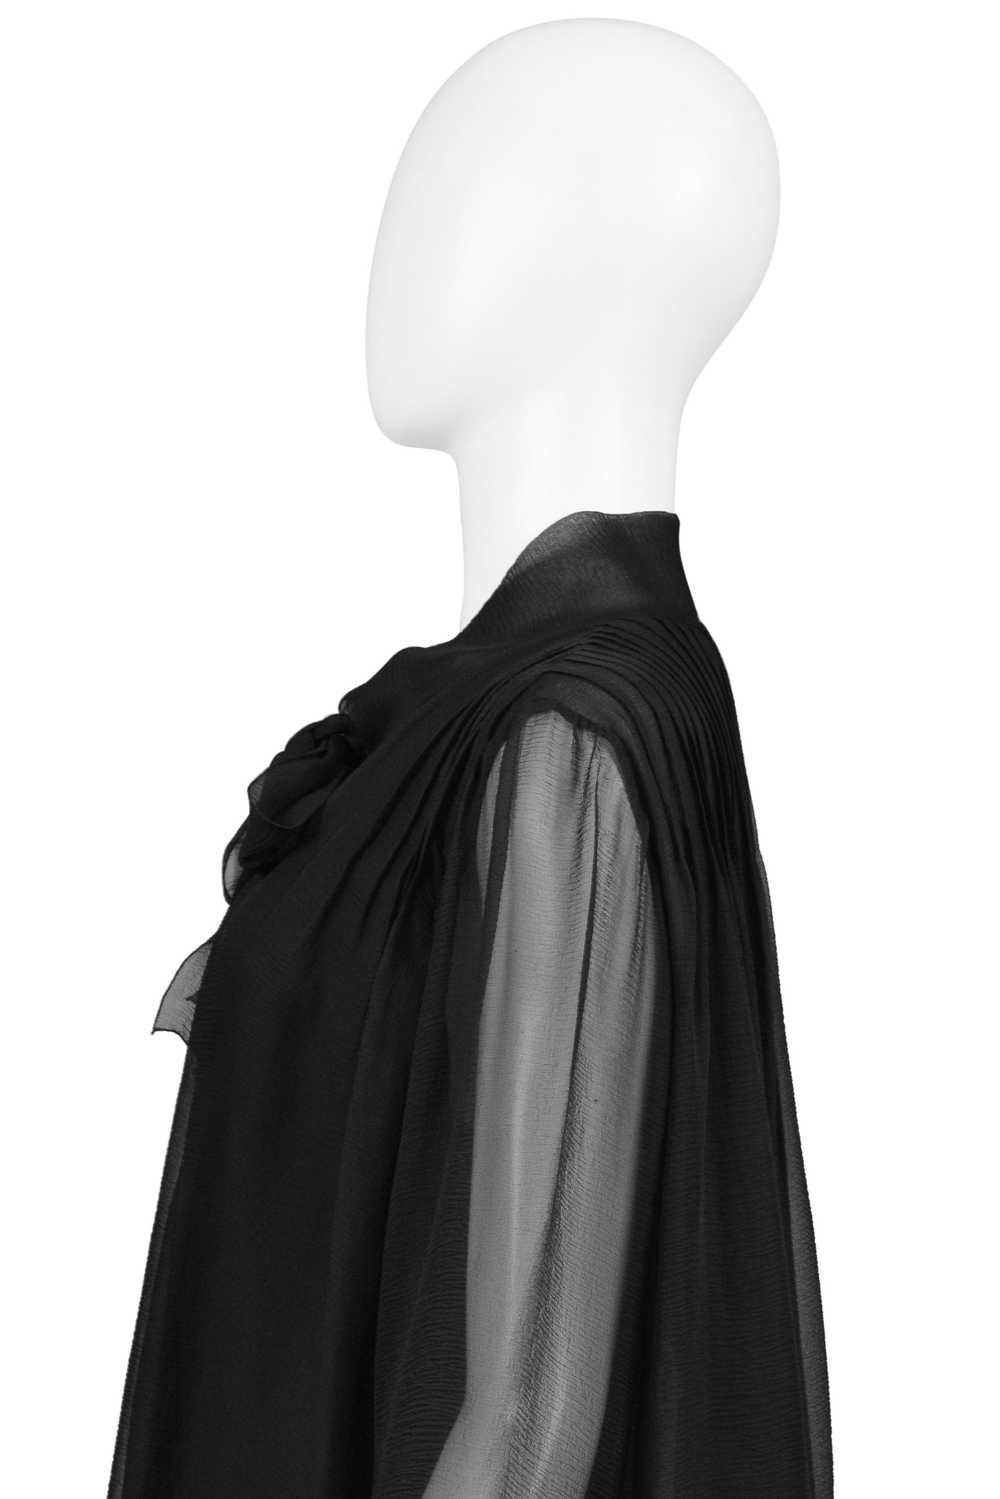 CHANEL BY KARL LAGERFELD BLACK CHIFFON PUSSY BOW … - image 5